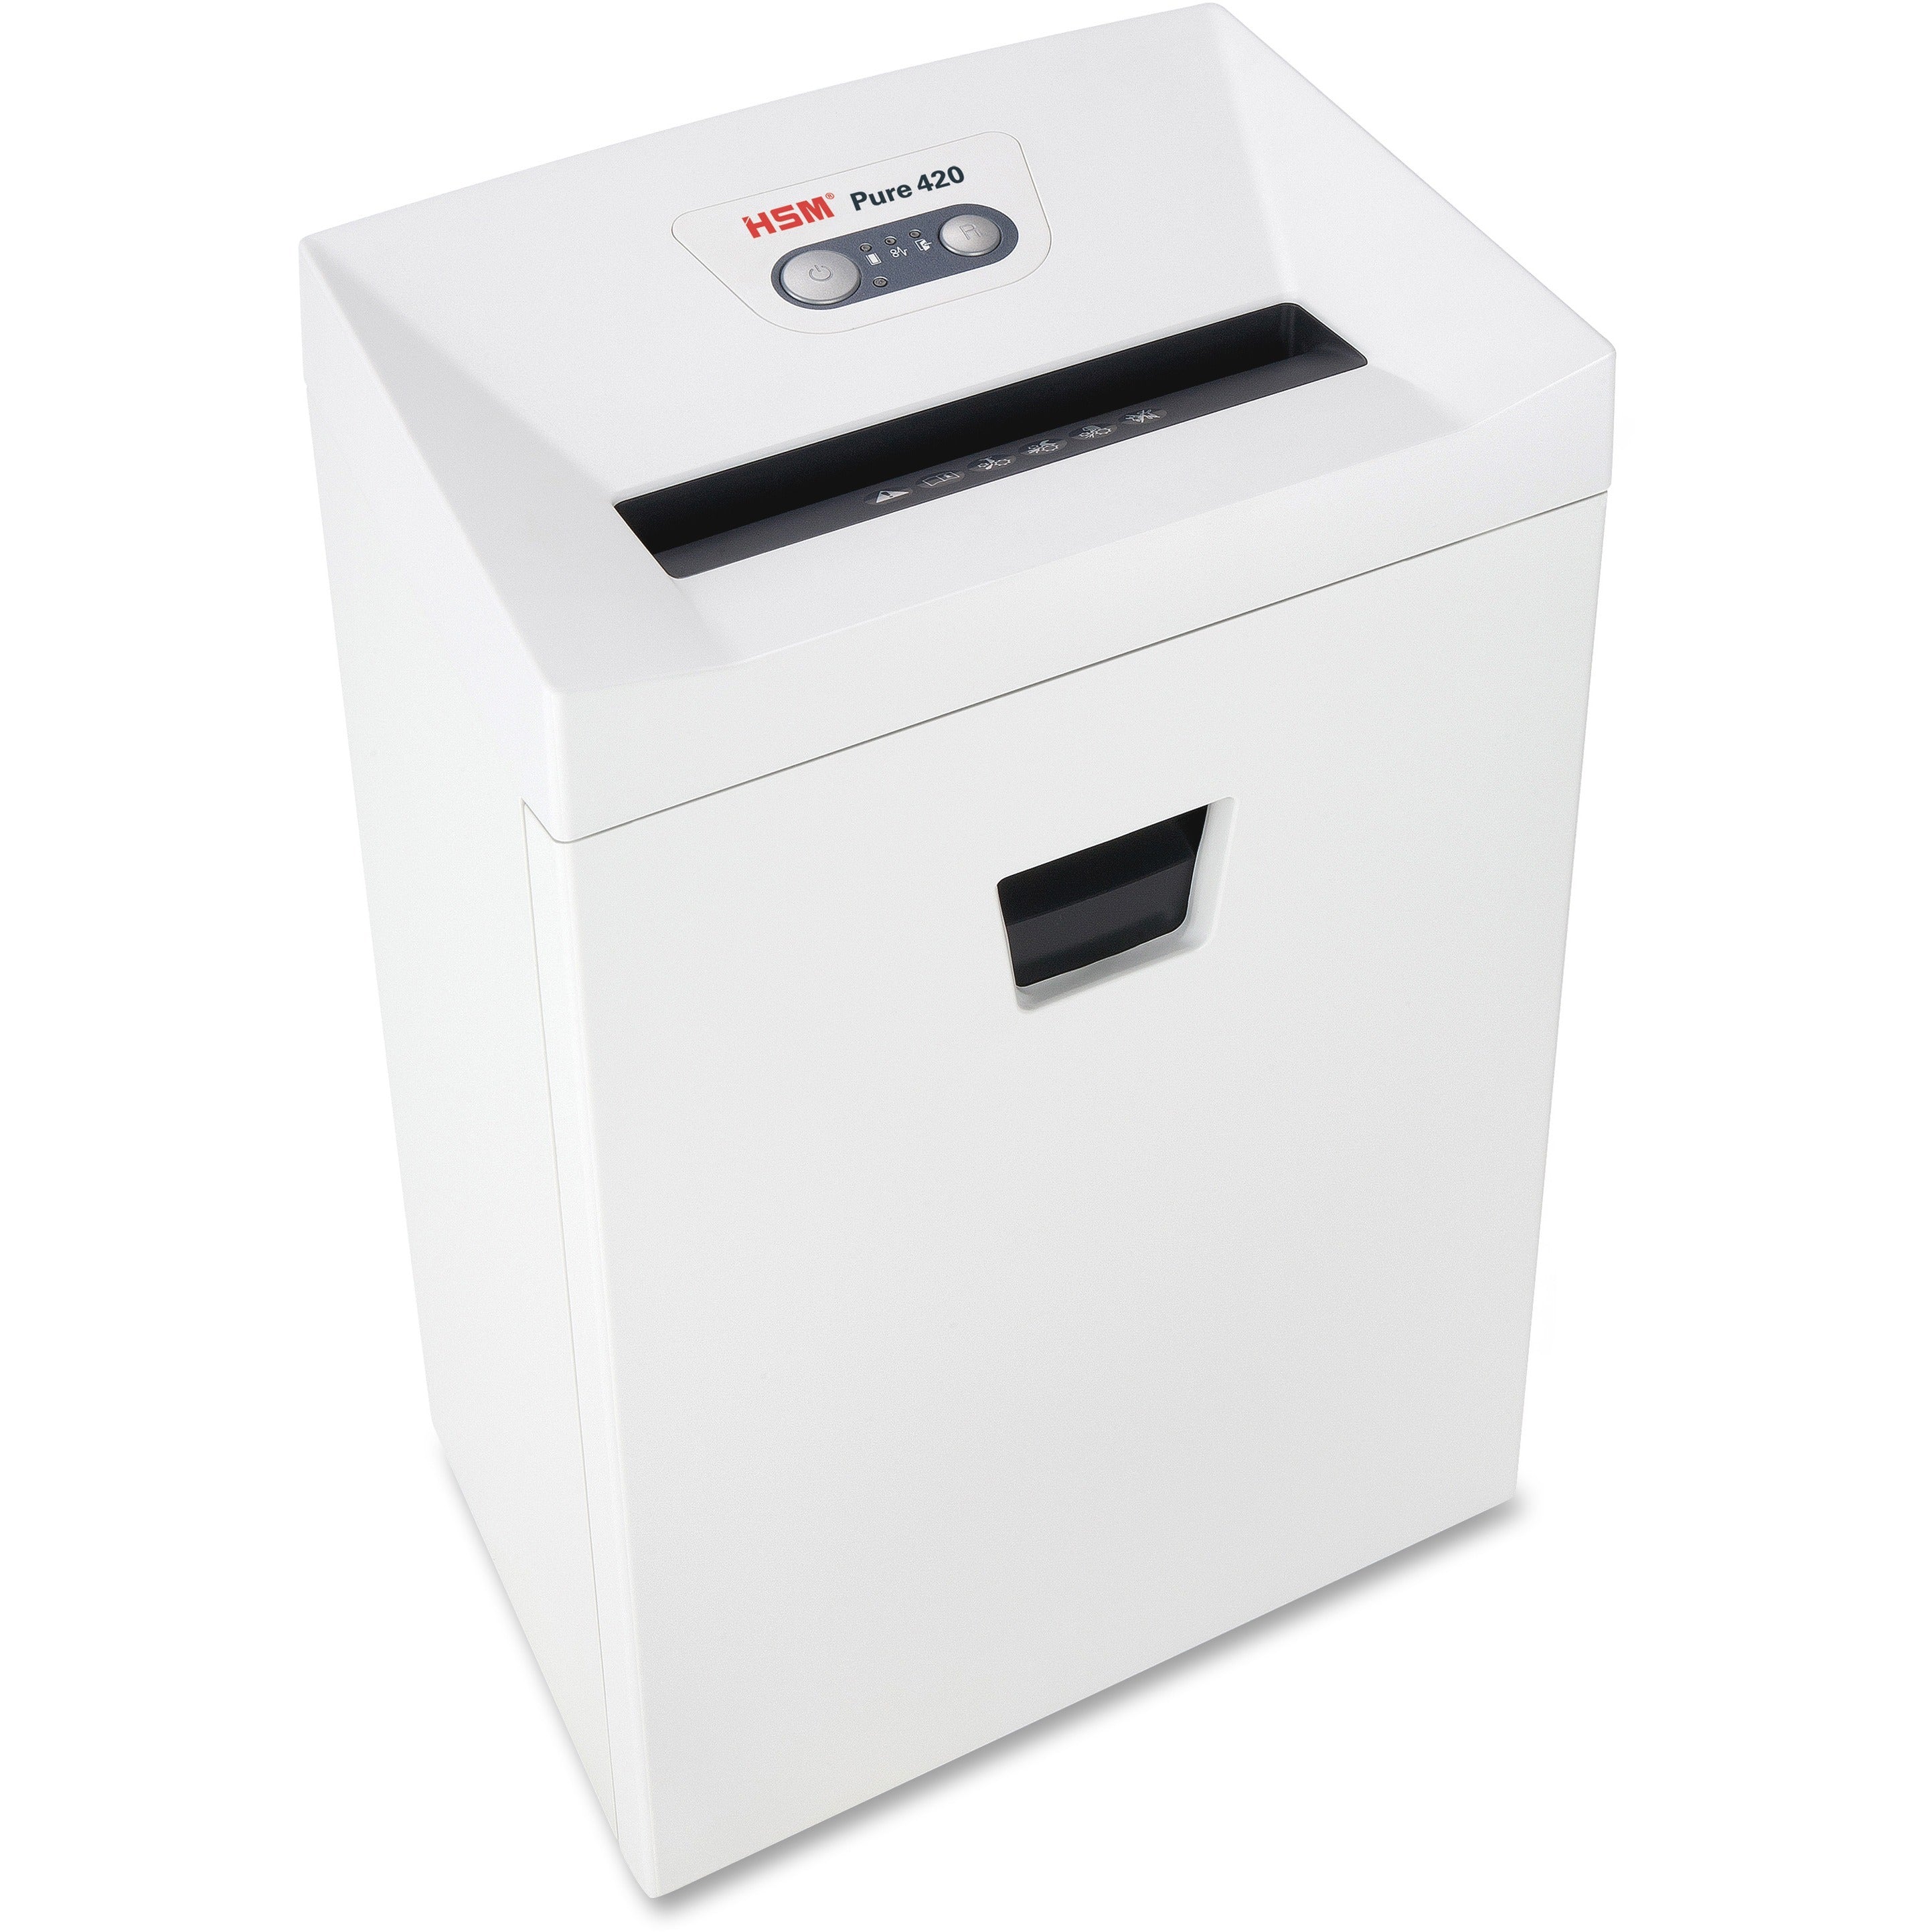 hsm-pure-420-3-16-x-1-1-8-continuous-shredder-particle-cut-15-per-pass-for-shredding-staples-paper-paper-clip-credit-card-cd-dvd-0188-x-1125-shred-size-p-4-o-3-t-4-e-3-f-1-945-throat-920-gal-wastebin-capacity-white-_hsm2343113 - 3